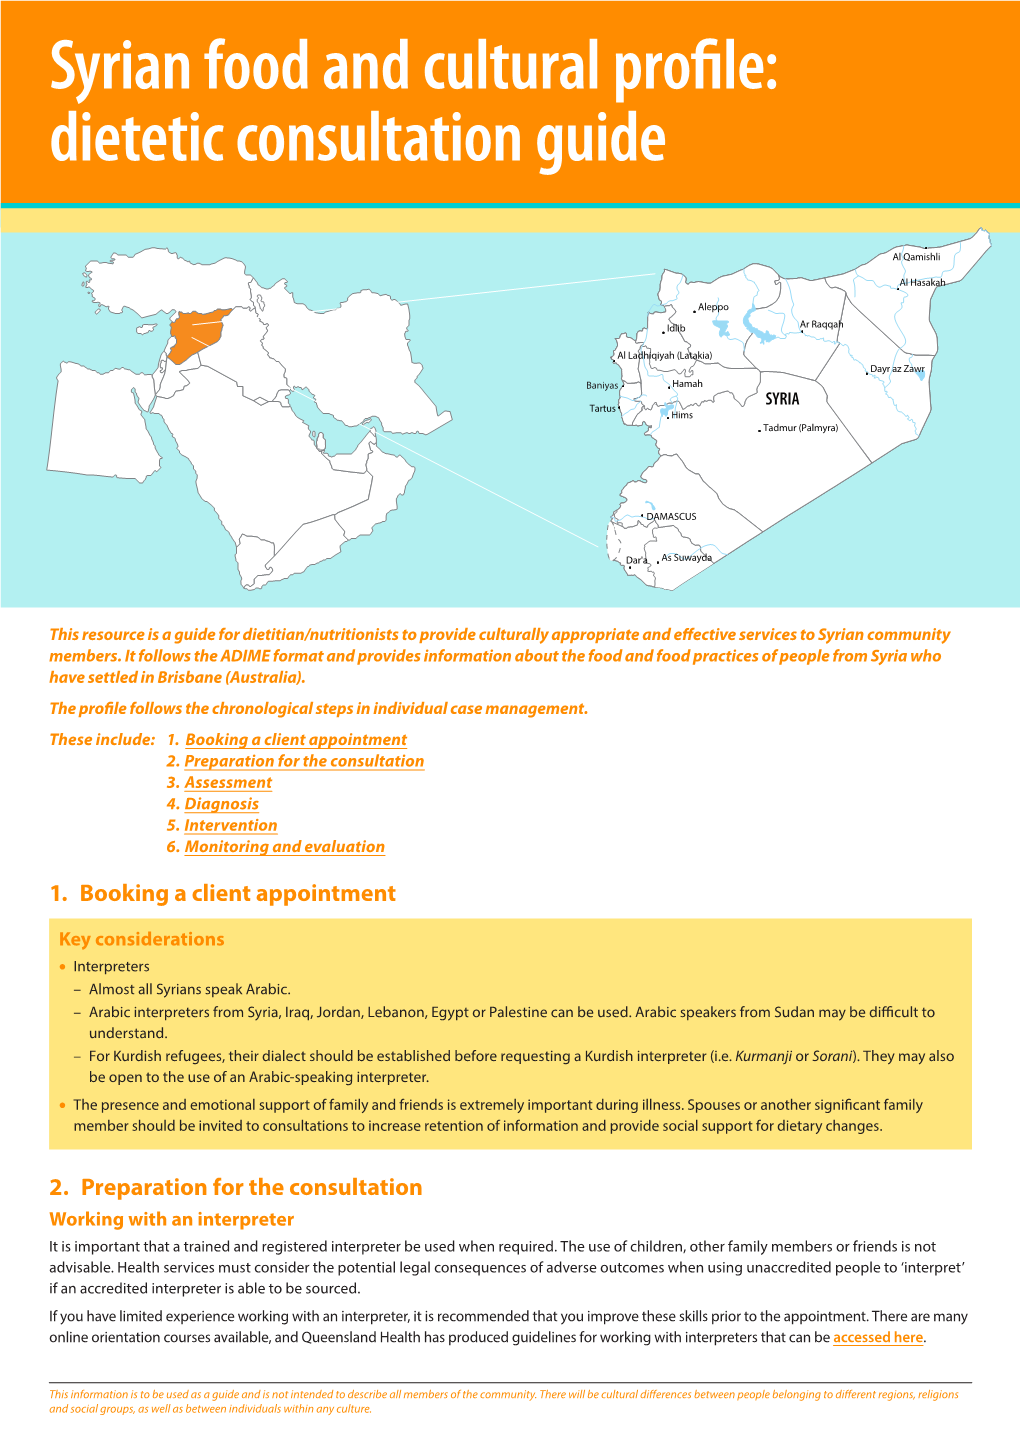 Syrian Food and Cultural Profile: Dietetic Consultation Guide